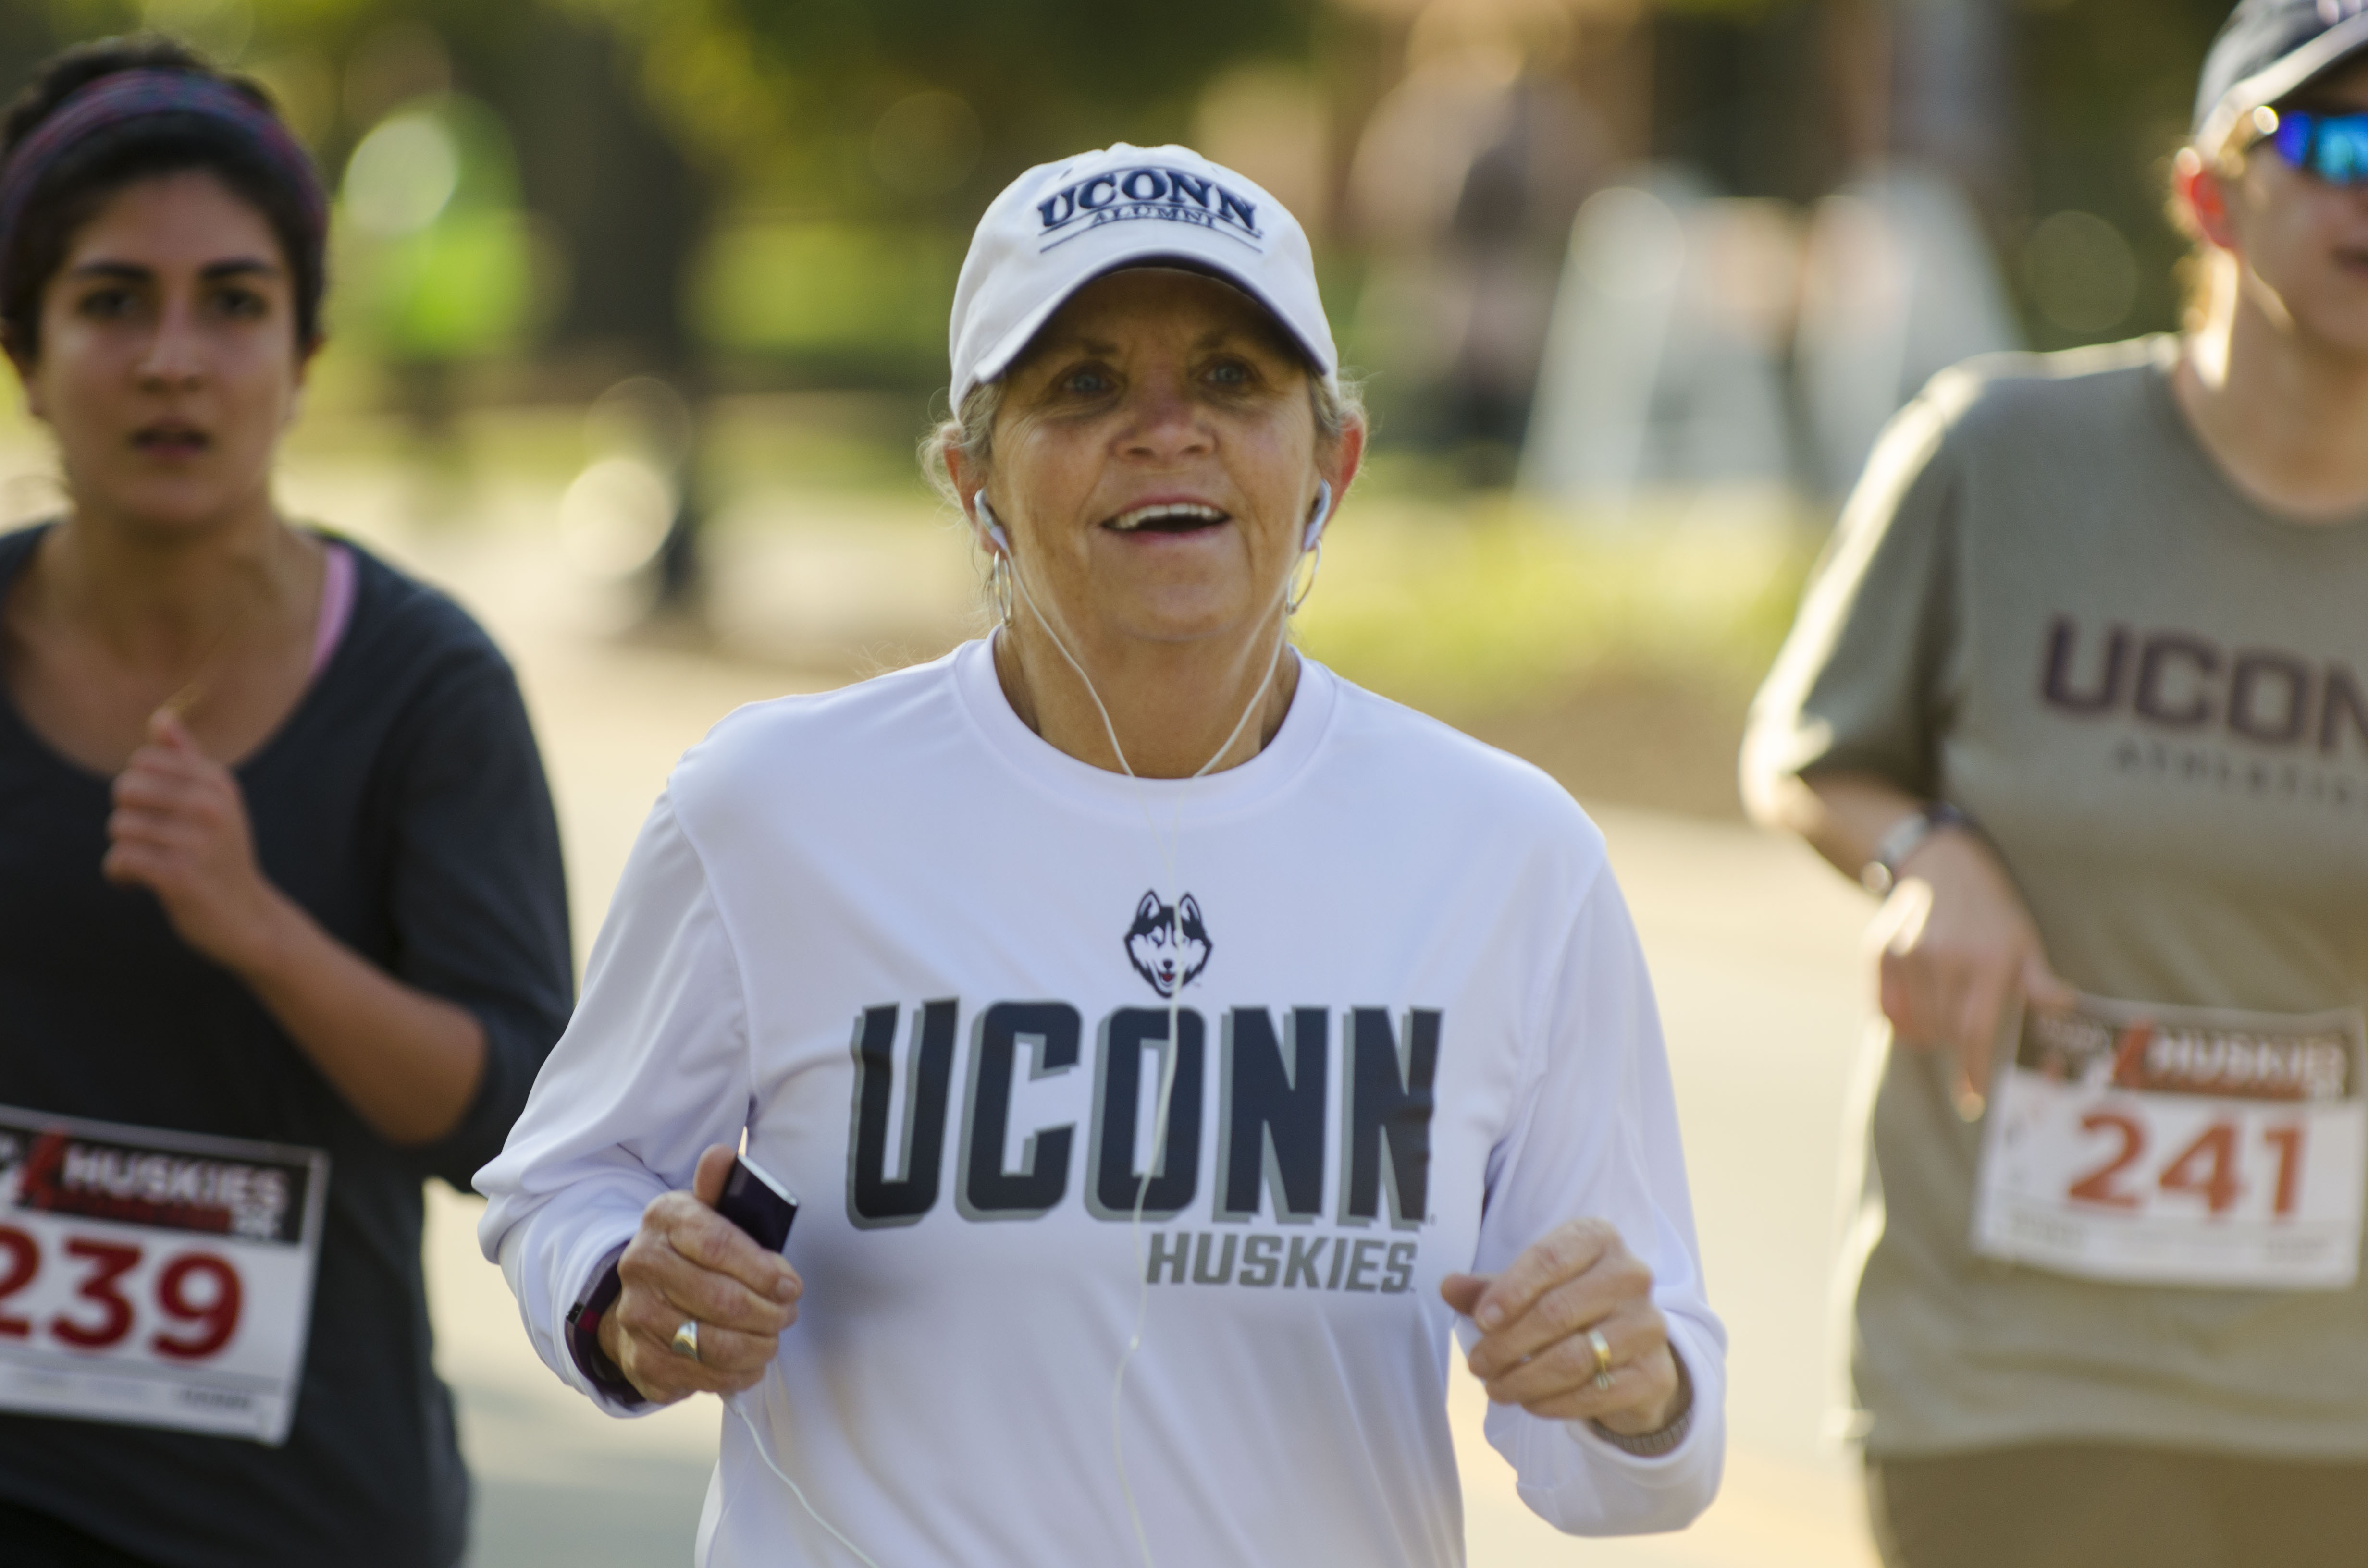 Students, alumni, friends, and family participated in the Huskies Forever 5k on Sunday morning, Oct. 16. (Garrett Spahn/UConn Photo)